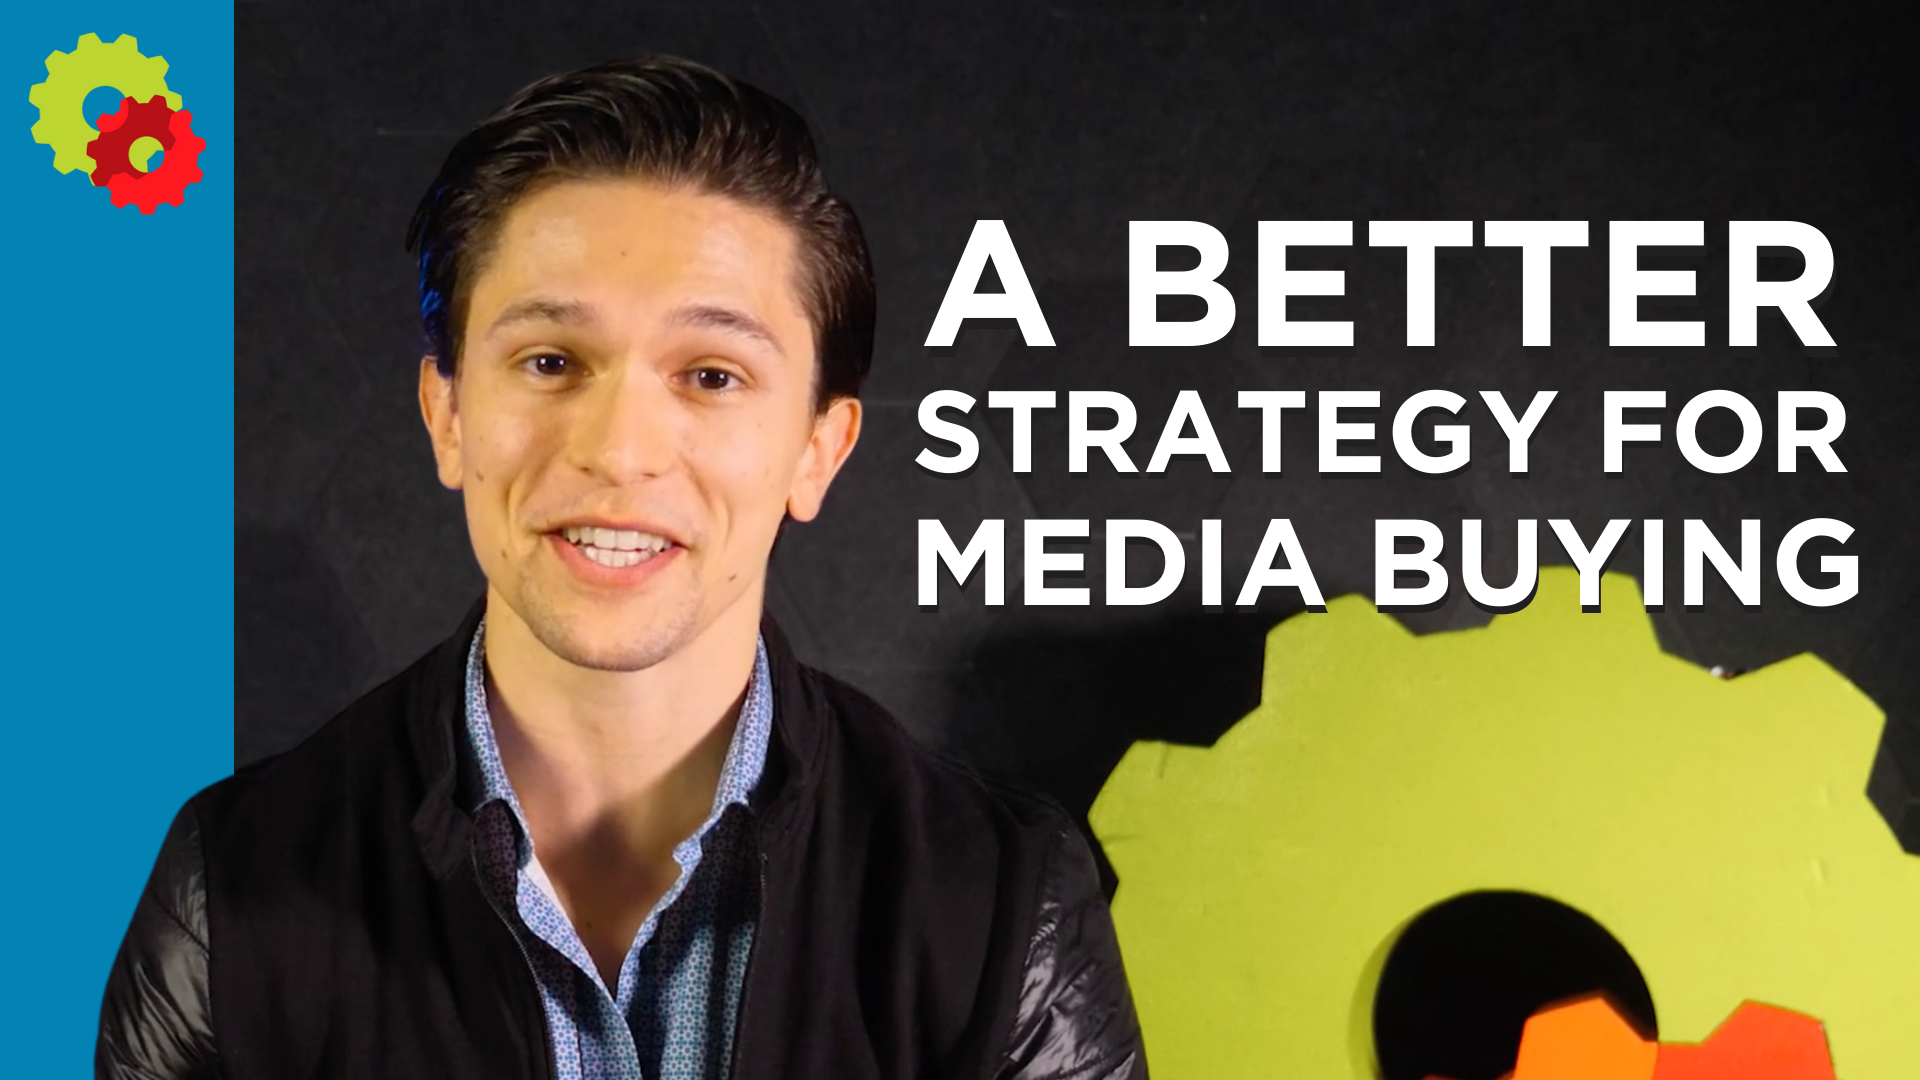 A Better Strategy for Media Buying with Hassan Bash [VIDEO]